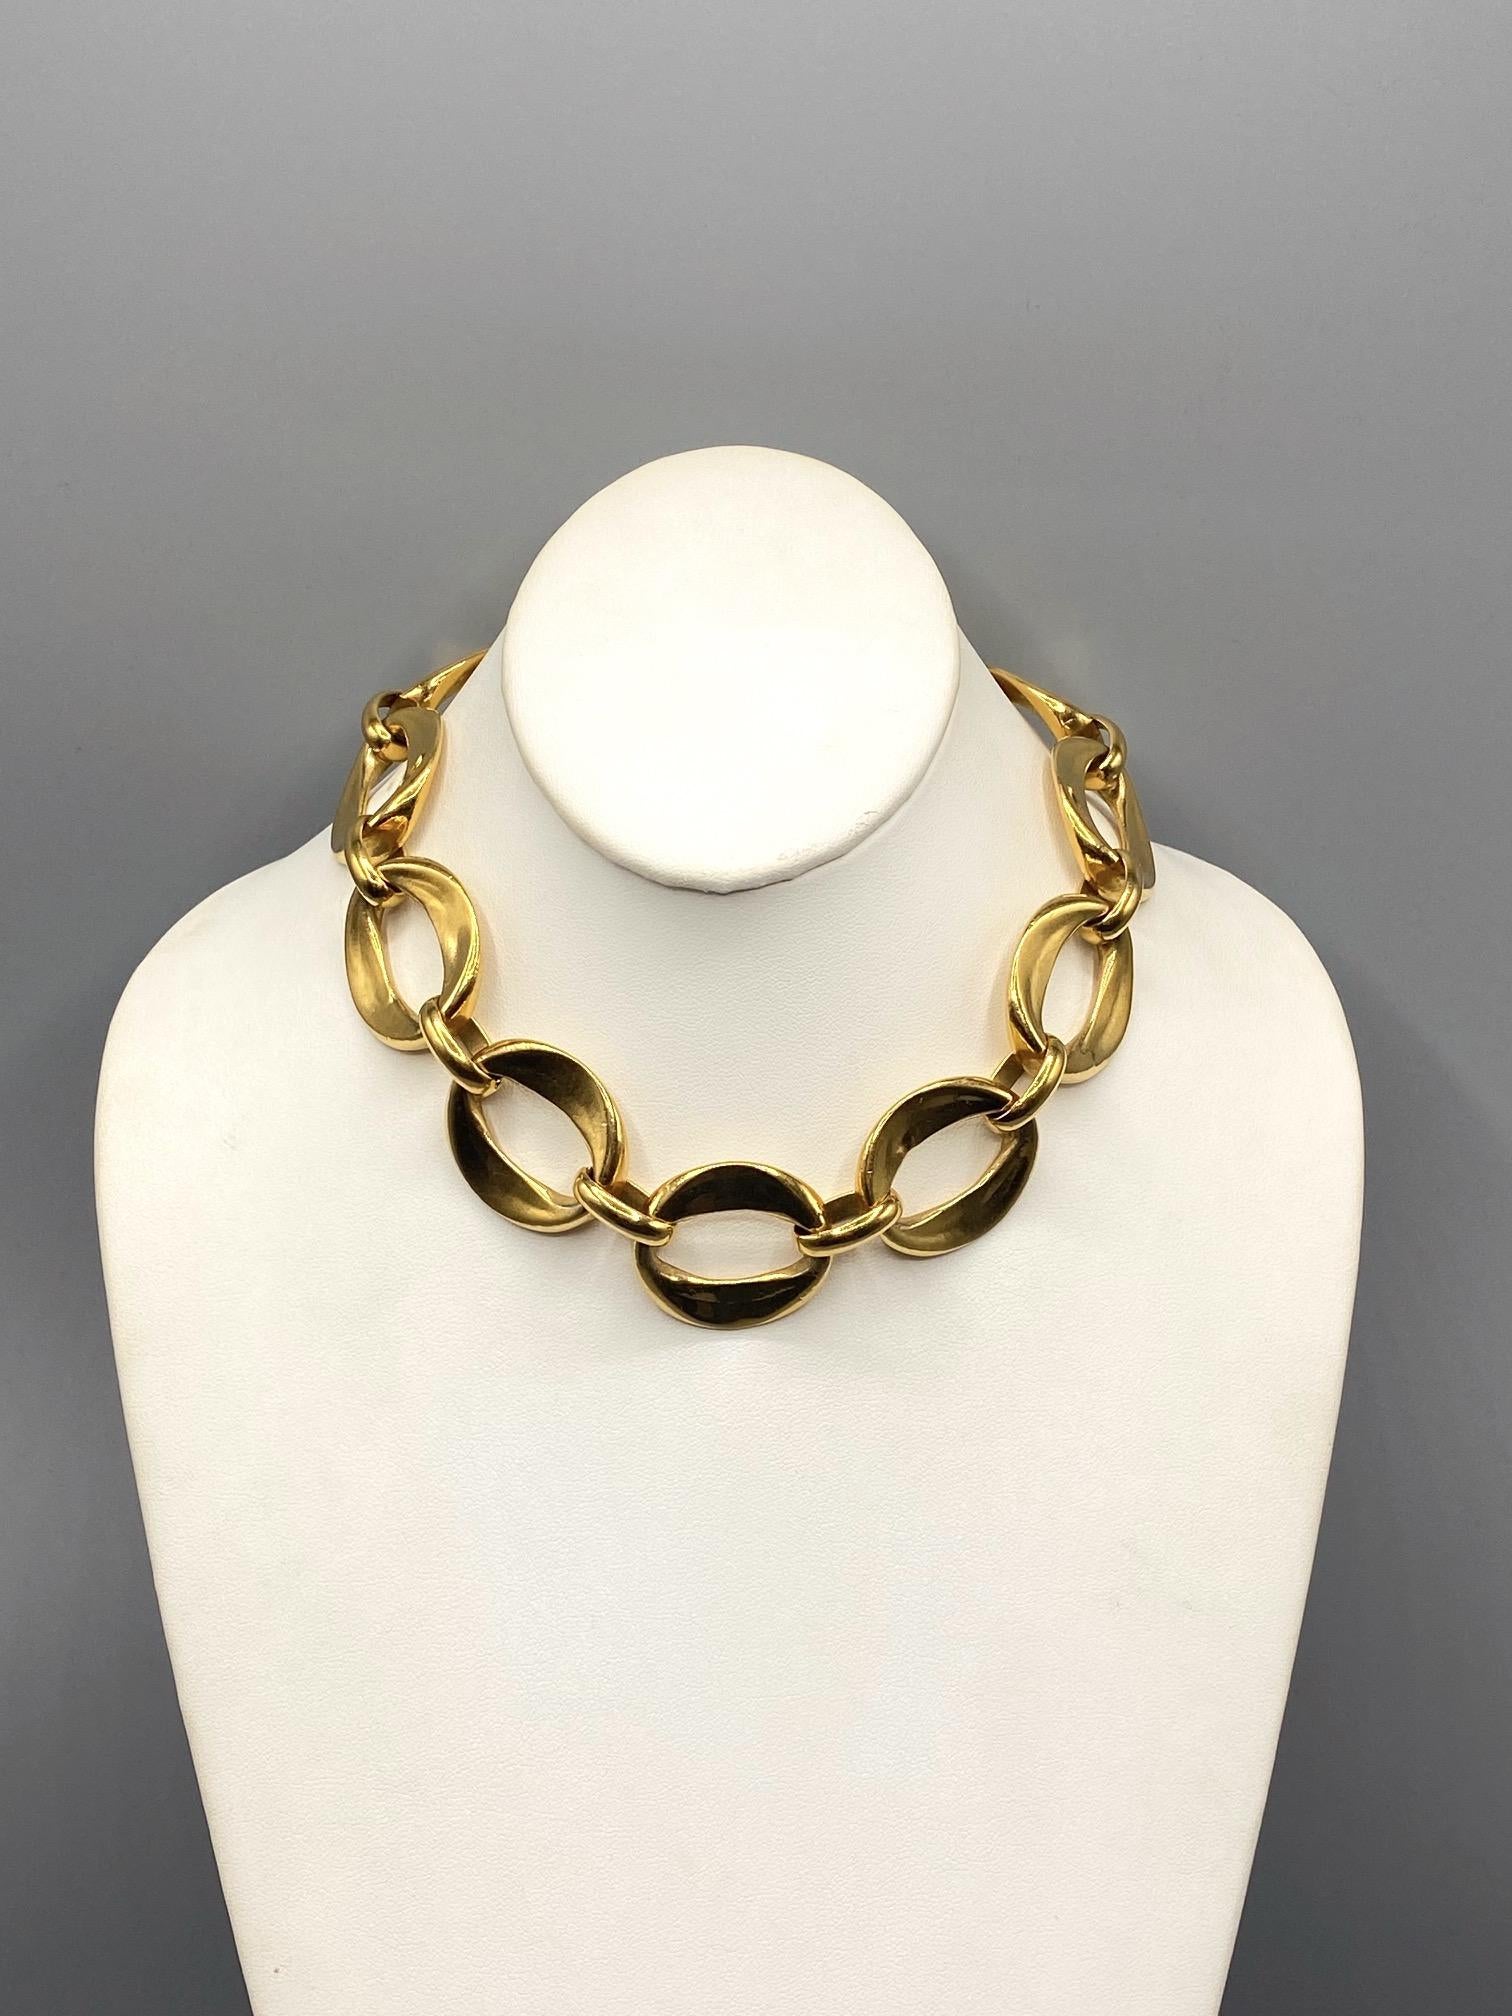 Chanel Early 1980s Large Oval Link Necklace 7